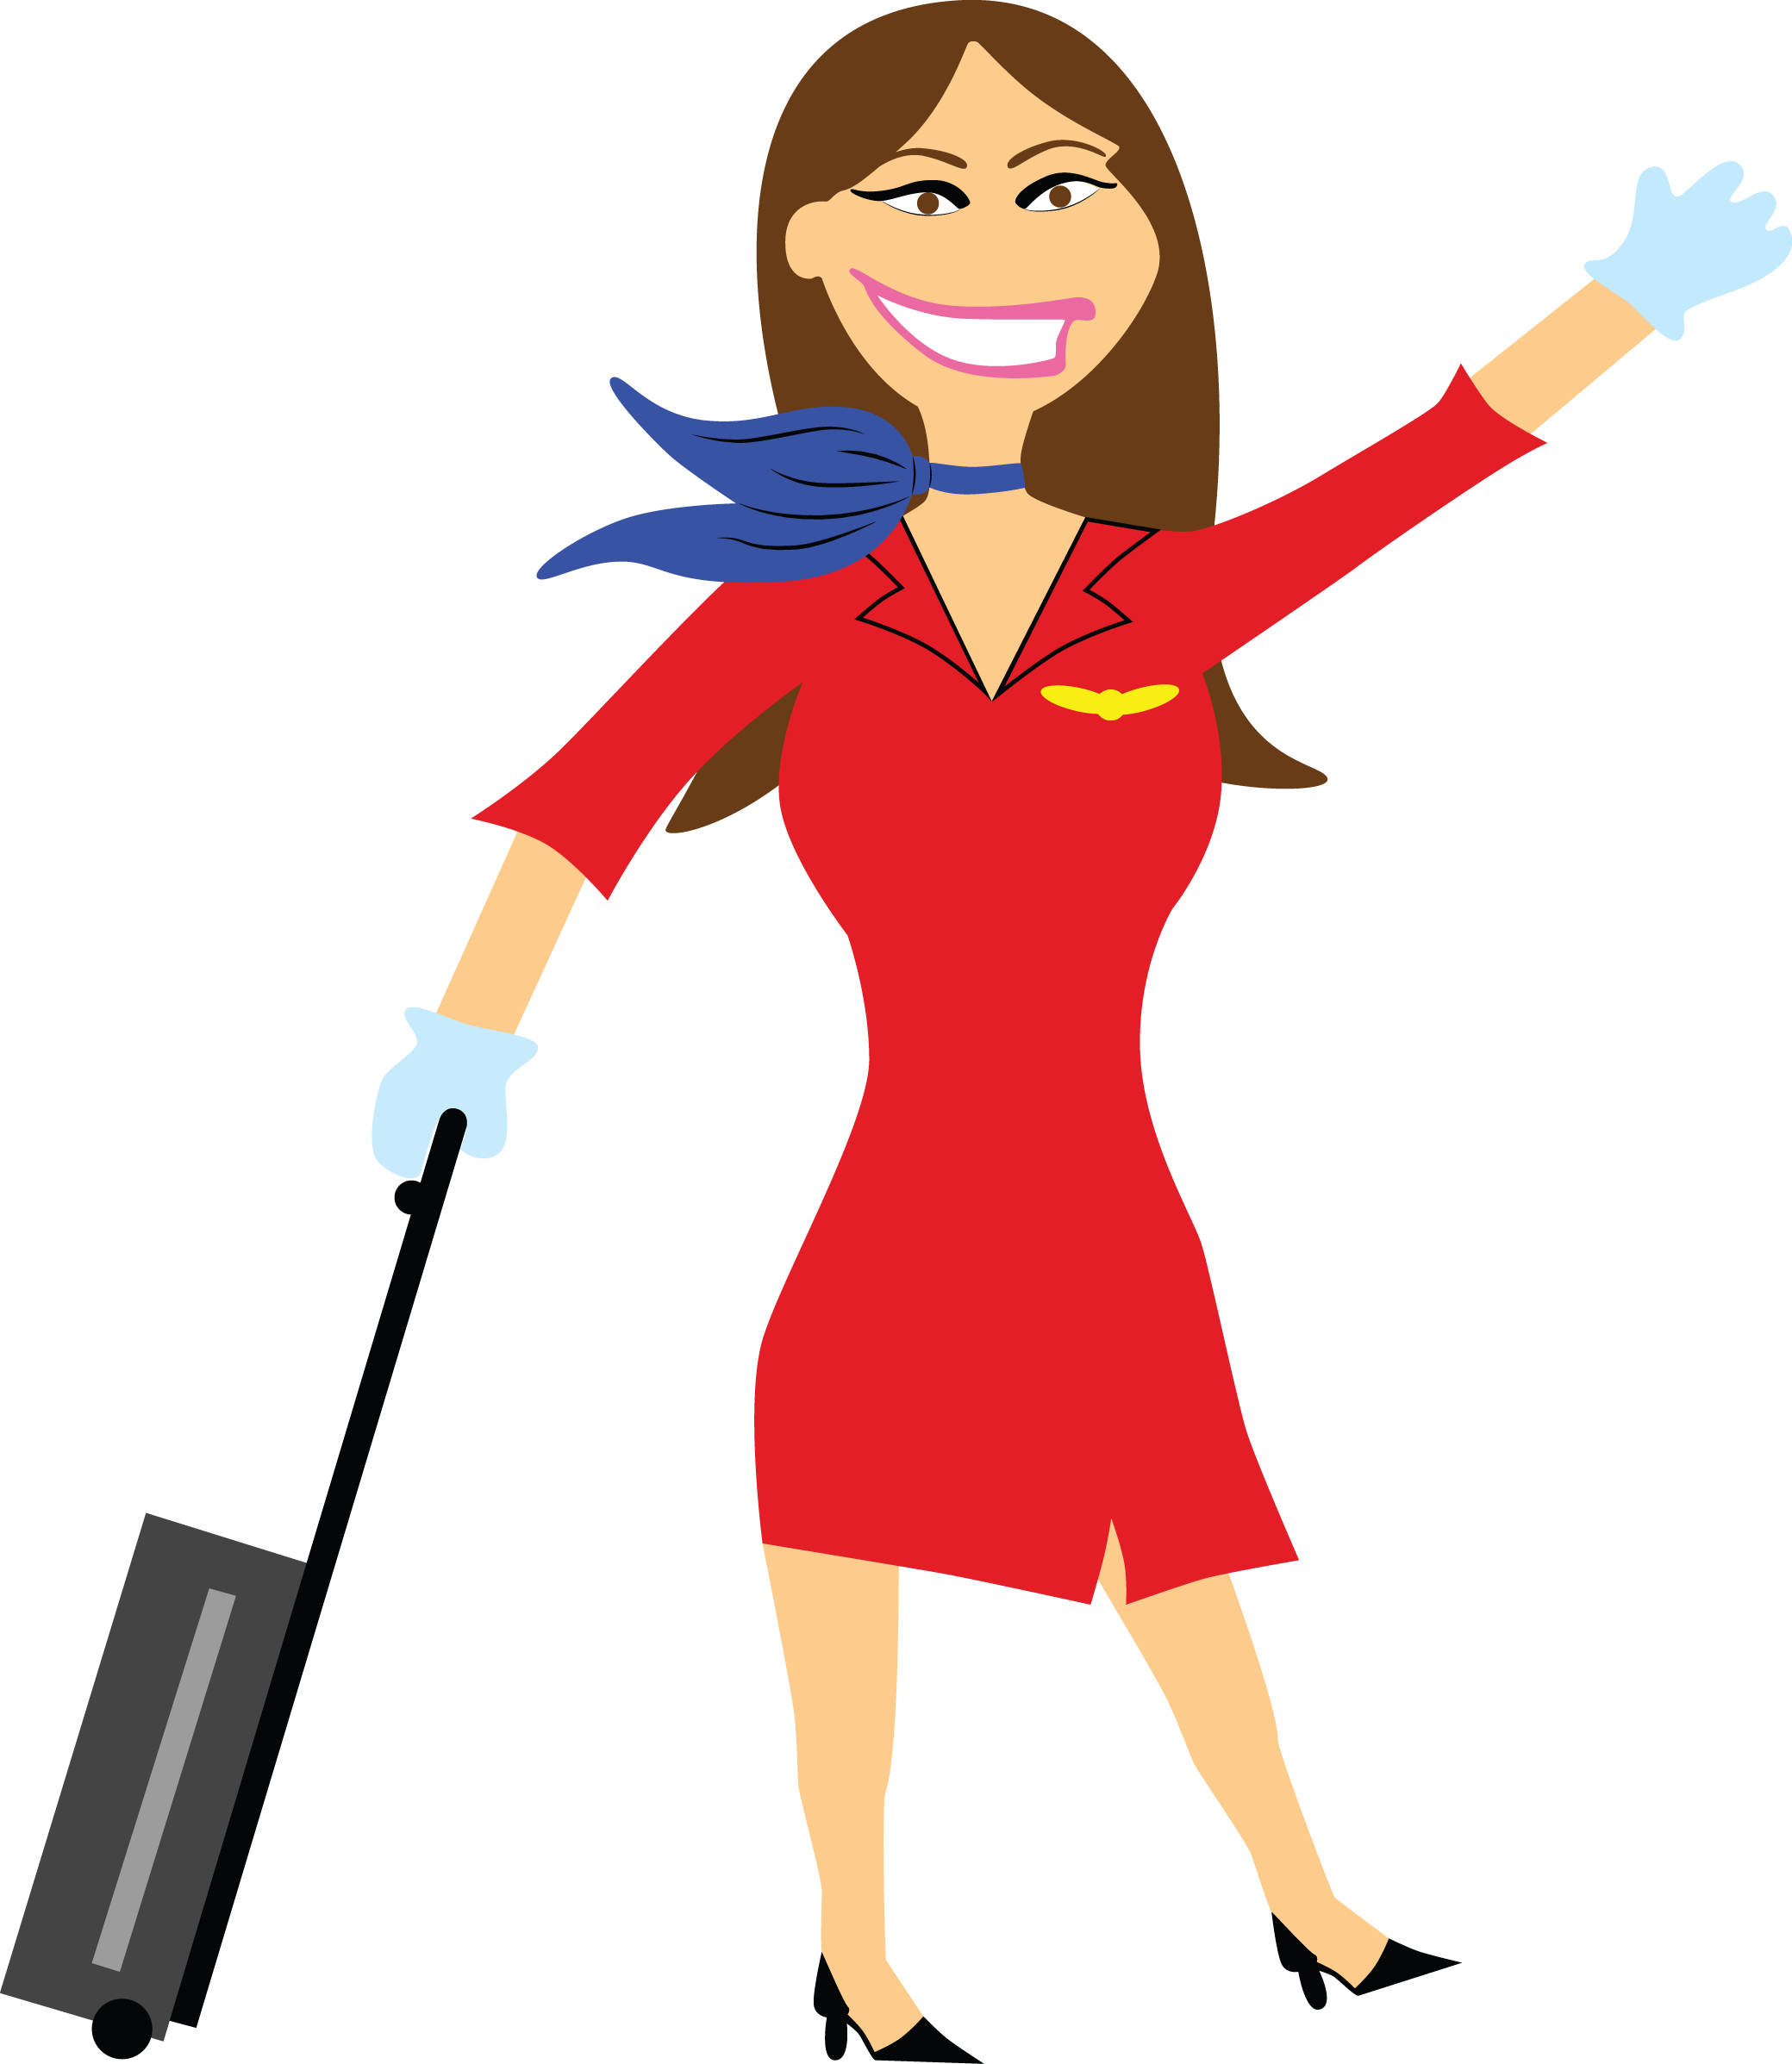 Stewardess PNG images 